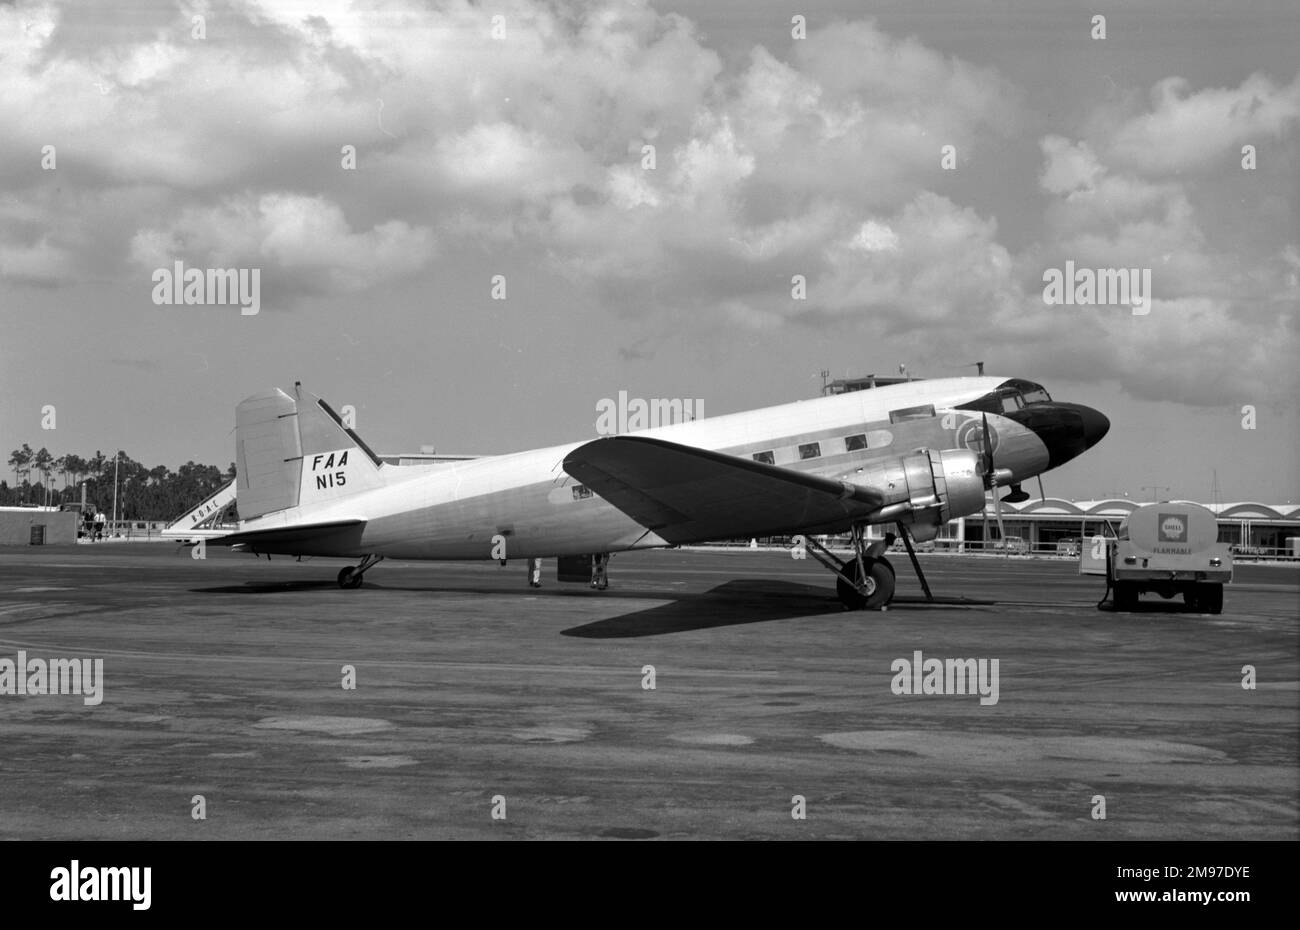 Douglas DC-3 N15 operated by the Federal Aviation Authority at Nassau on 19 March 1963 Stock Photo